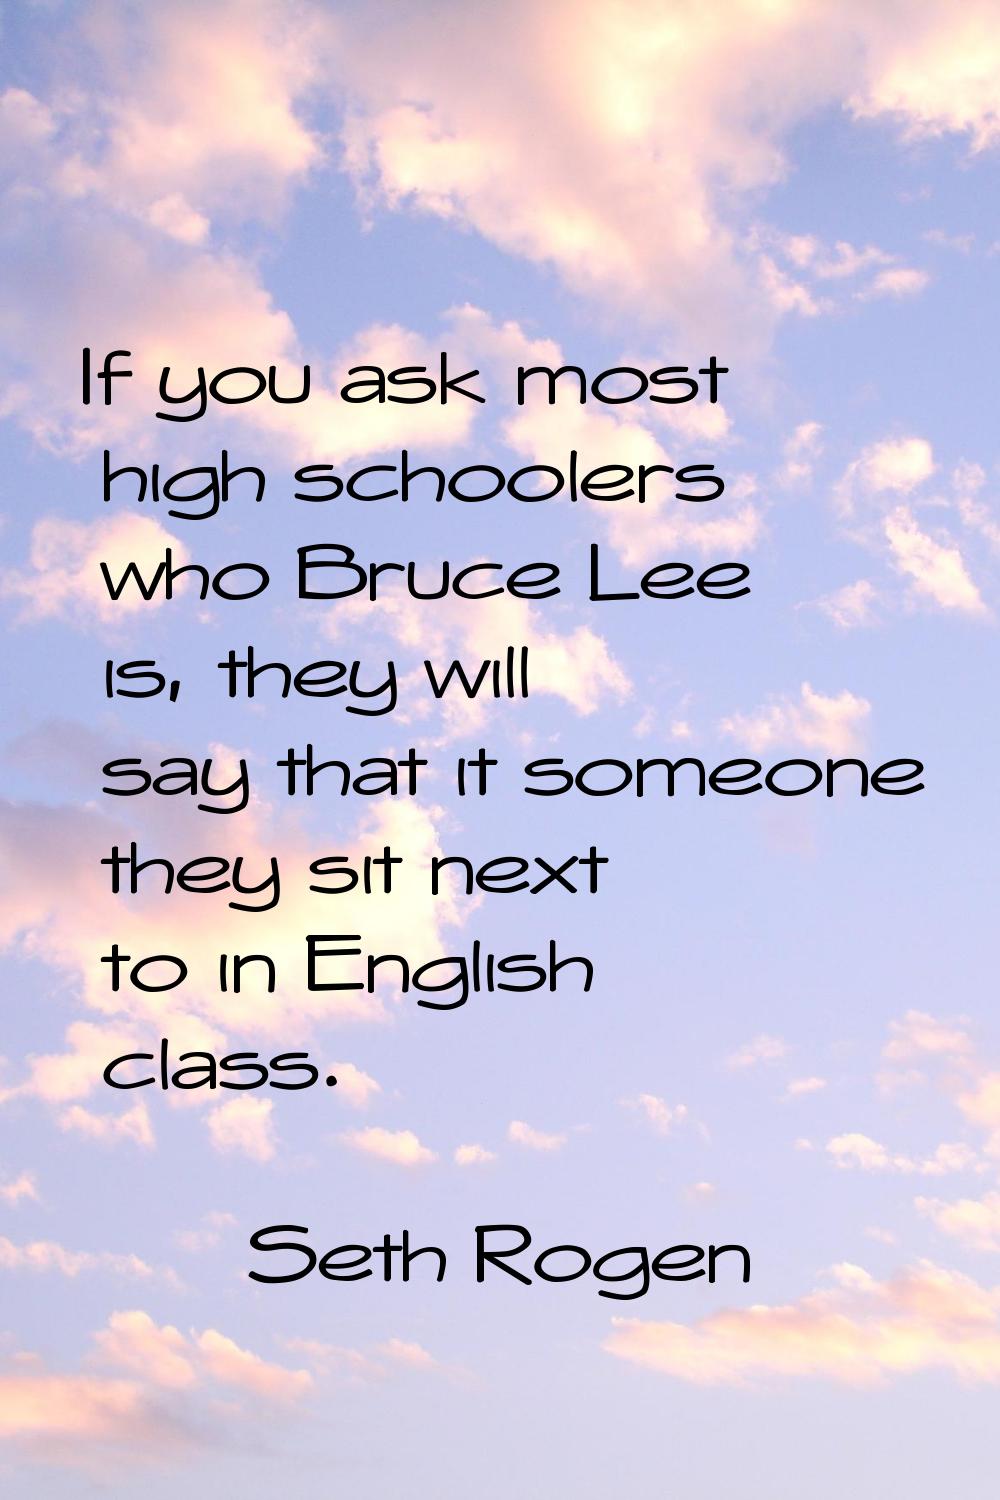 If you ask most high schoolers who Bruce Lee is, they will say that it someone they sit next to in 